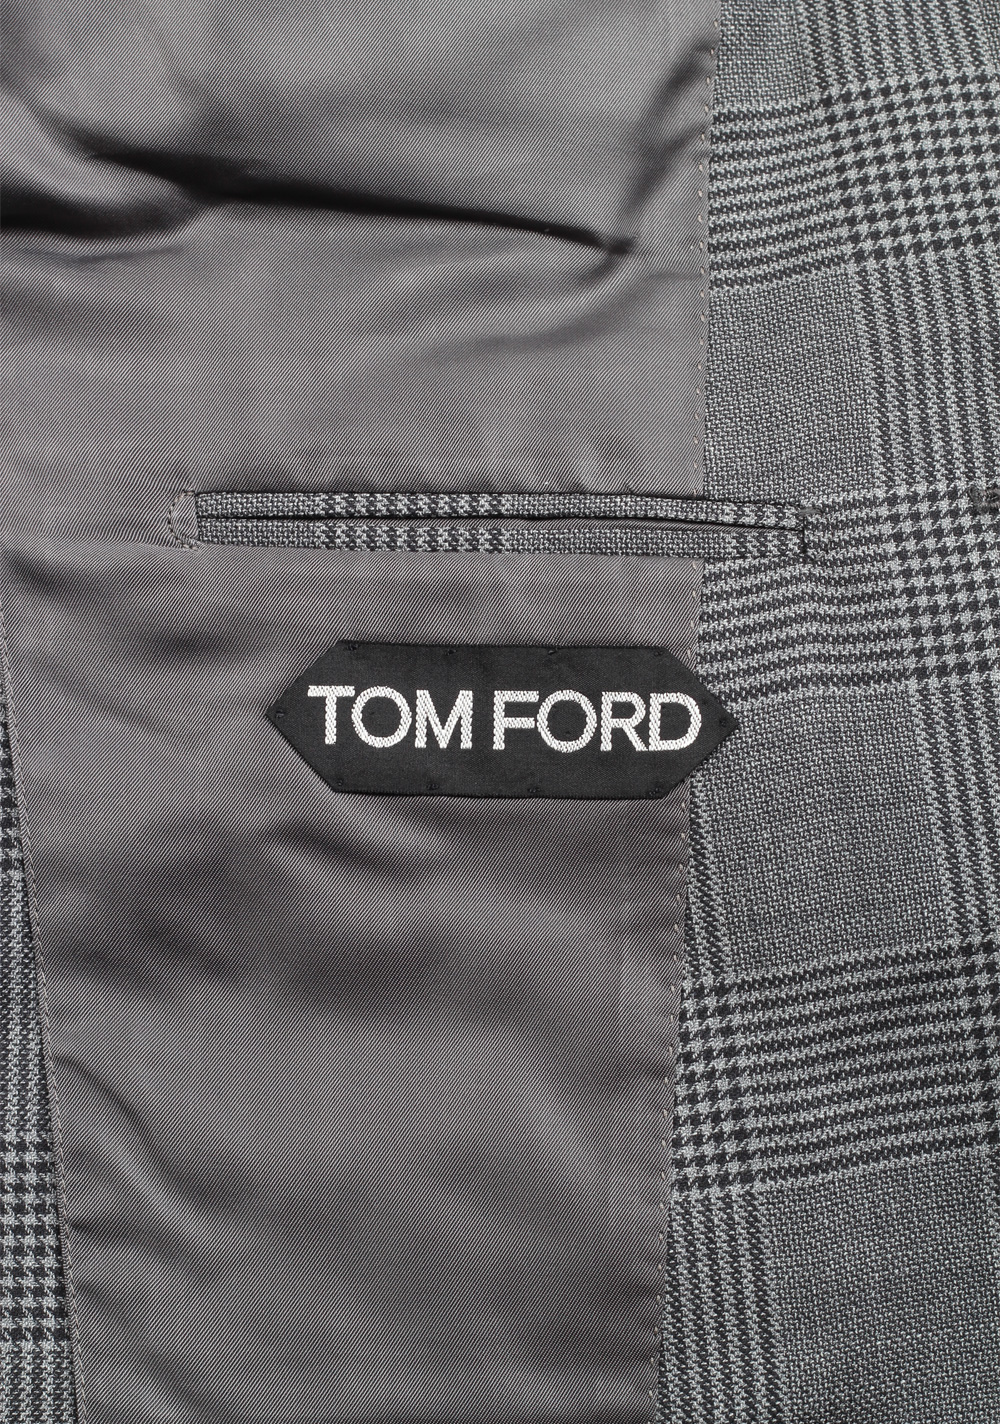 TOM FORD Shelton Checked Gray Suit Size 48 / 38R U.S. In Wool Silk | Costume Limité